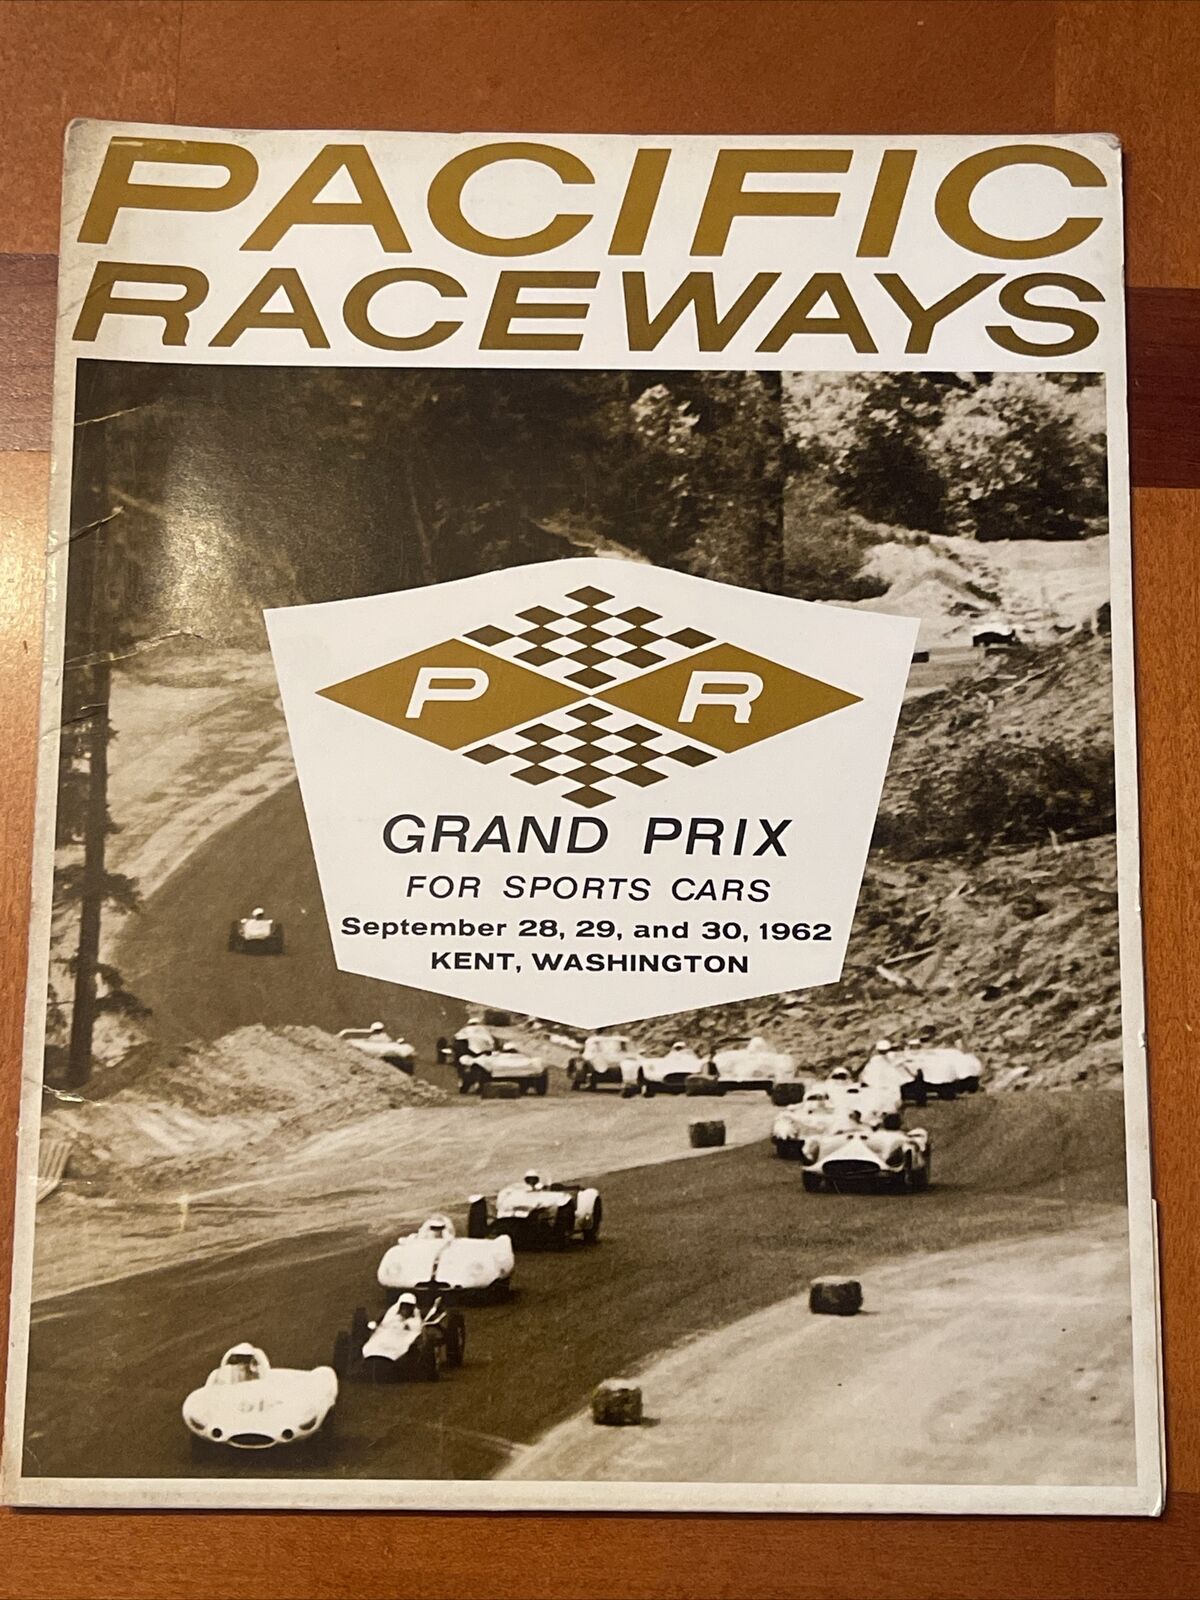 1962 Press Kit for Pacific Raceways Sports Car Race, Including Driver Entry Form